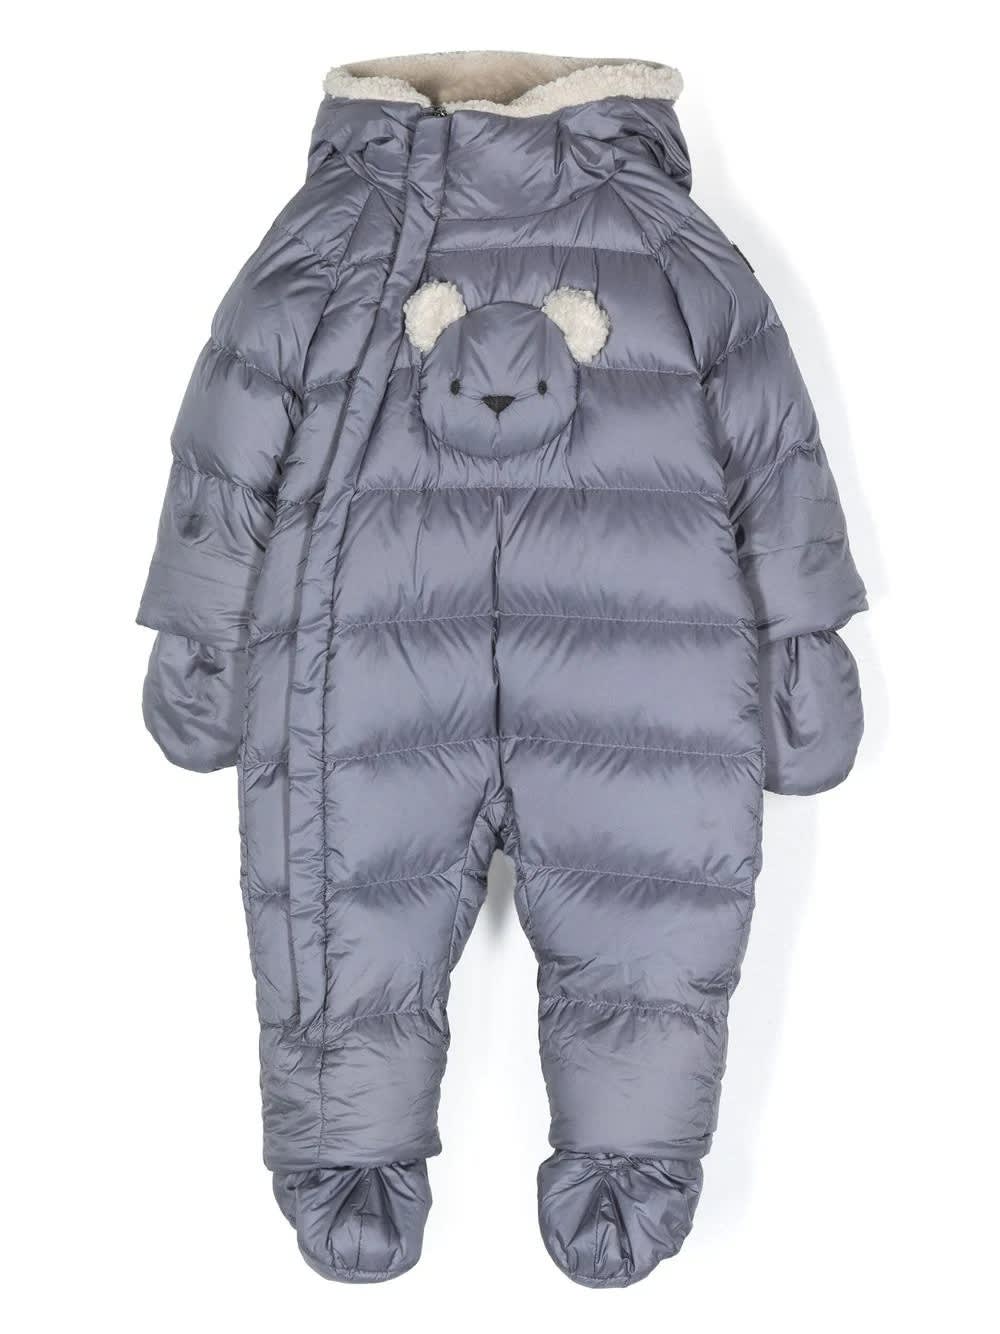 IL GUFO NIGHT SKY HOODED SNOWSUIT WITH TEDDY